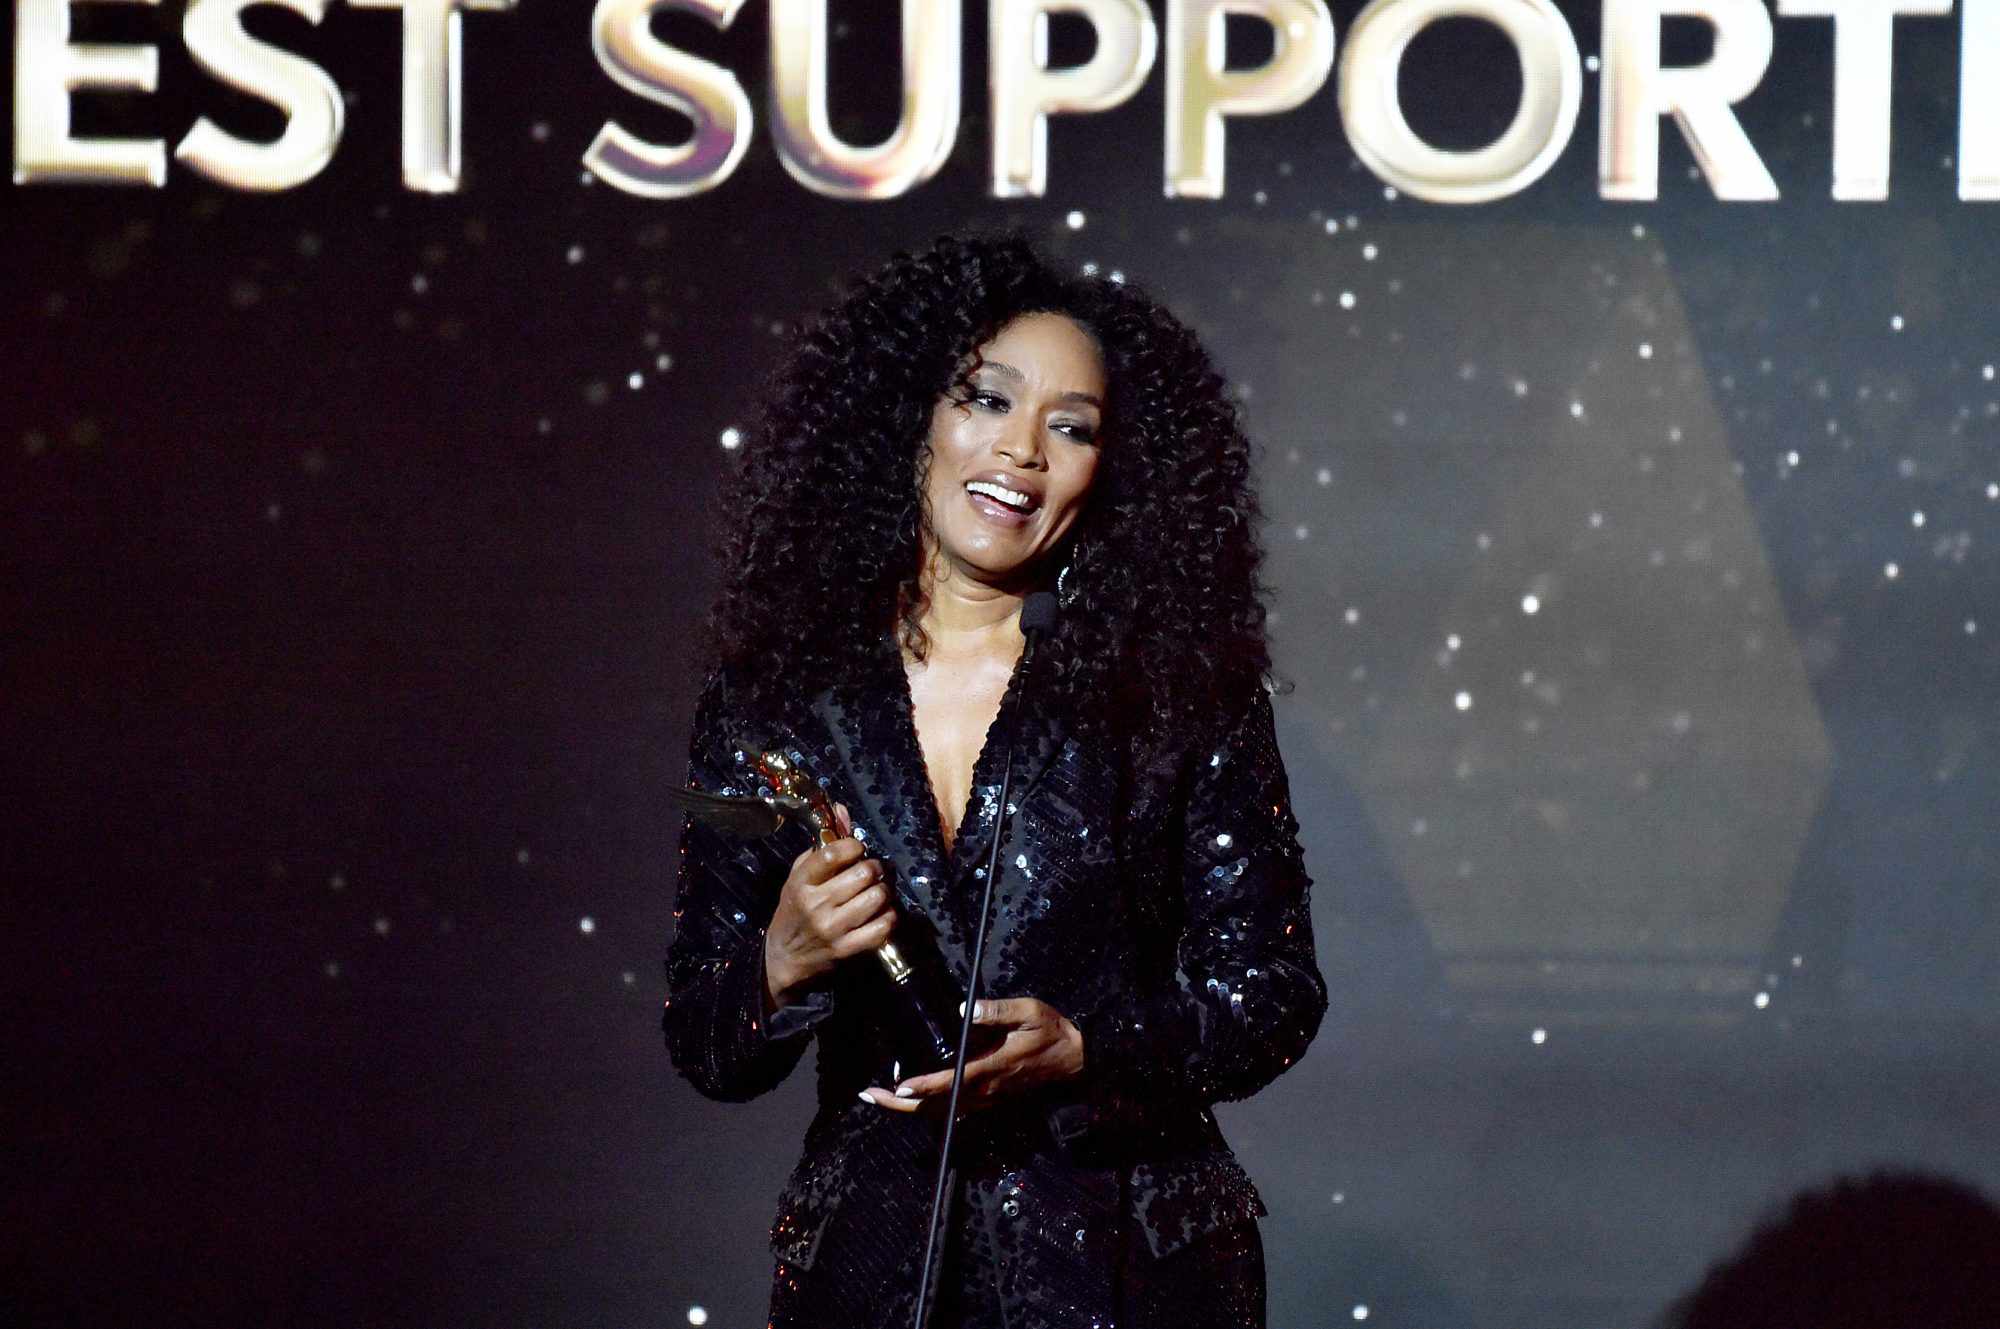 BEVERLY HILLS, CALIFORNIA - FEBRUARY 24: Angela Bassett accepts the Best Supporting Actress award for 'Black Panther: Wakanda Forever' onstage during the Hollywood Critics Association's 2023 HCA Film Awards at Beverly Wilshire, A Four Seasons Hotel on February 24, 2023 in Beverly Hills, California. (Photo by Alberto E. Rodriguez/Getty Images)